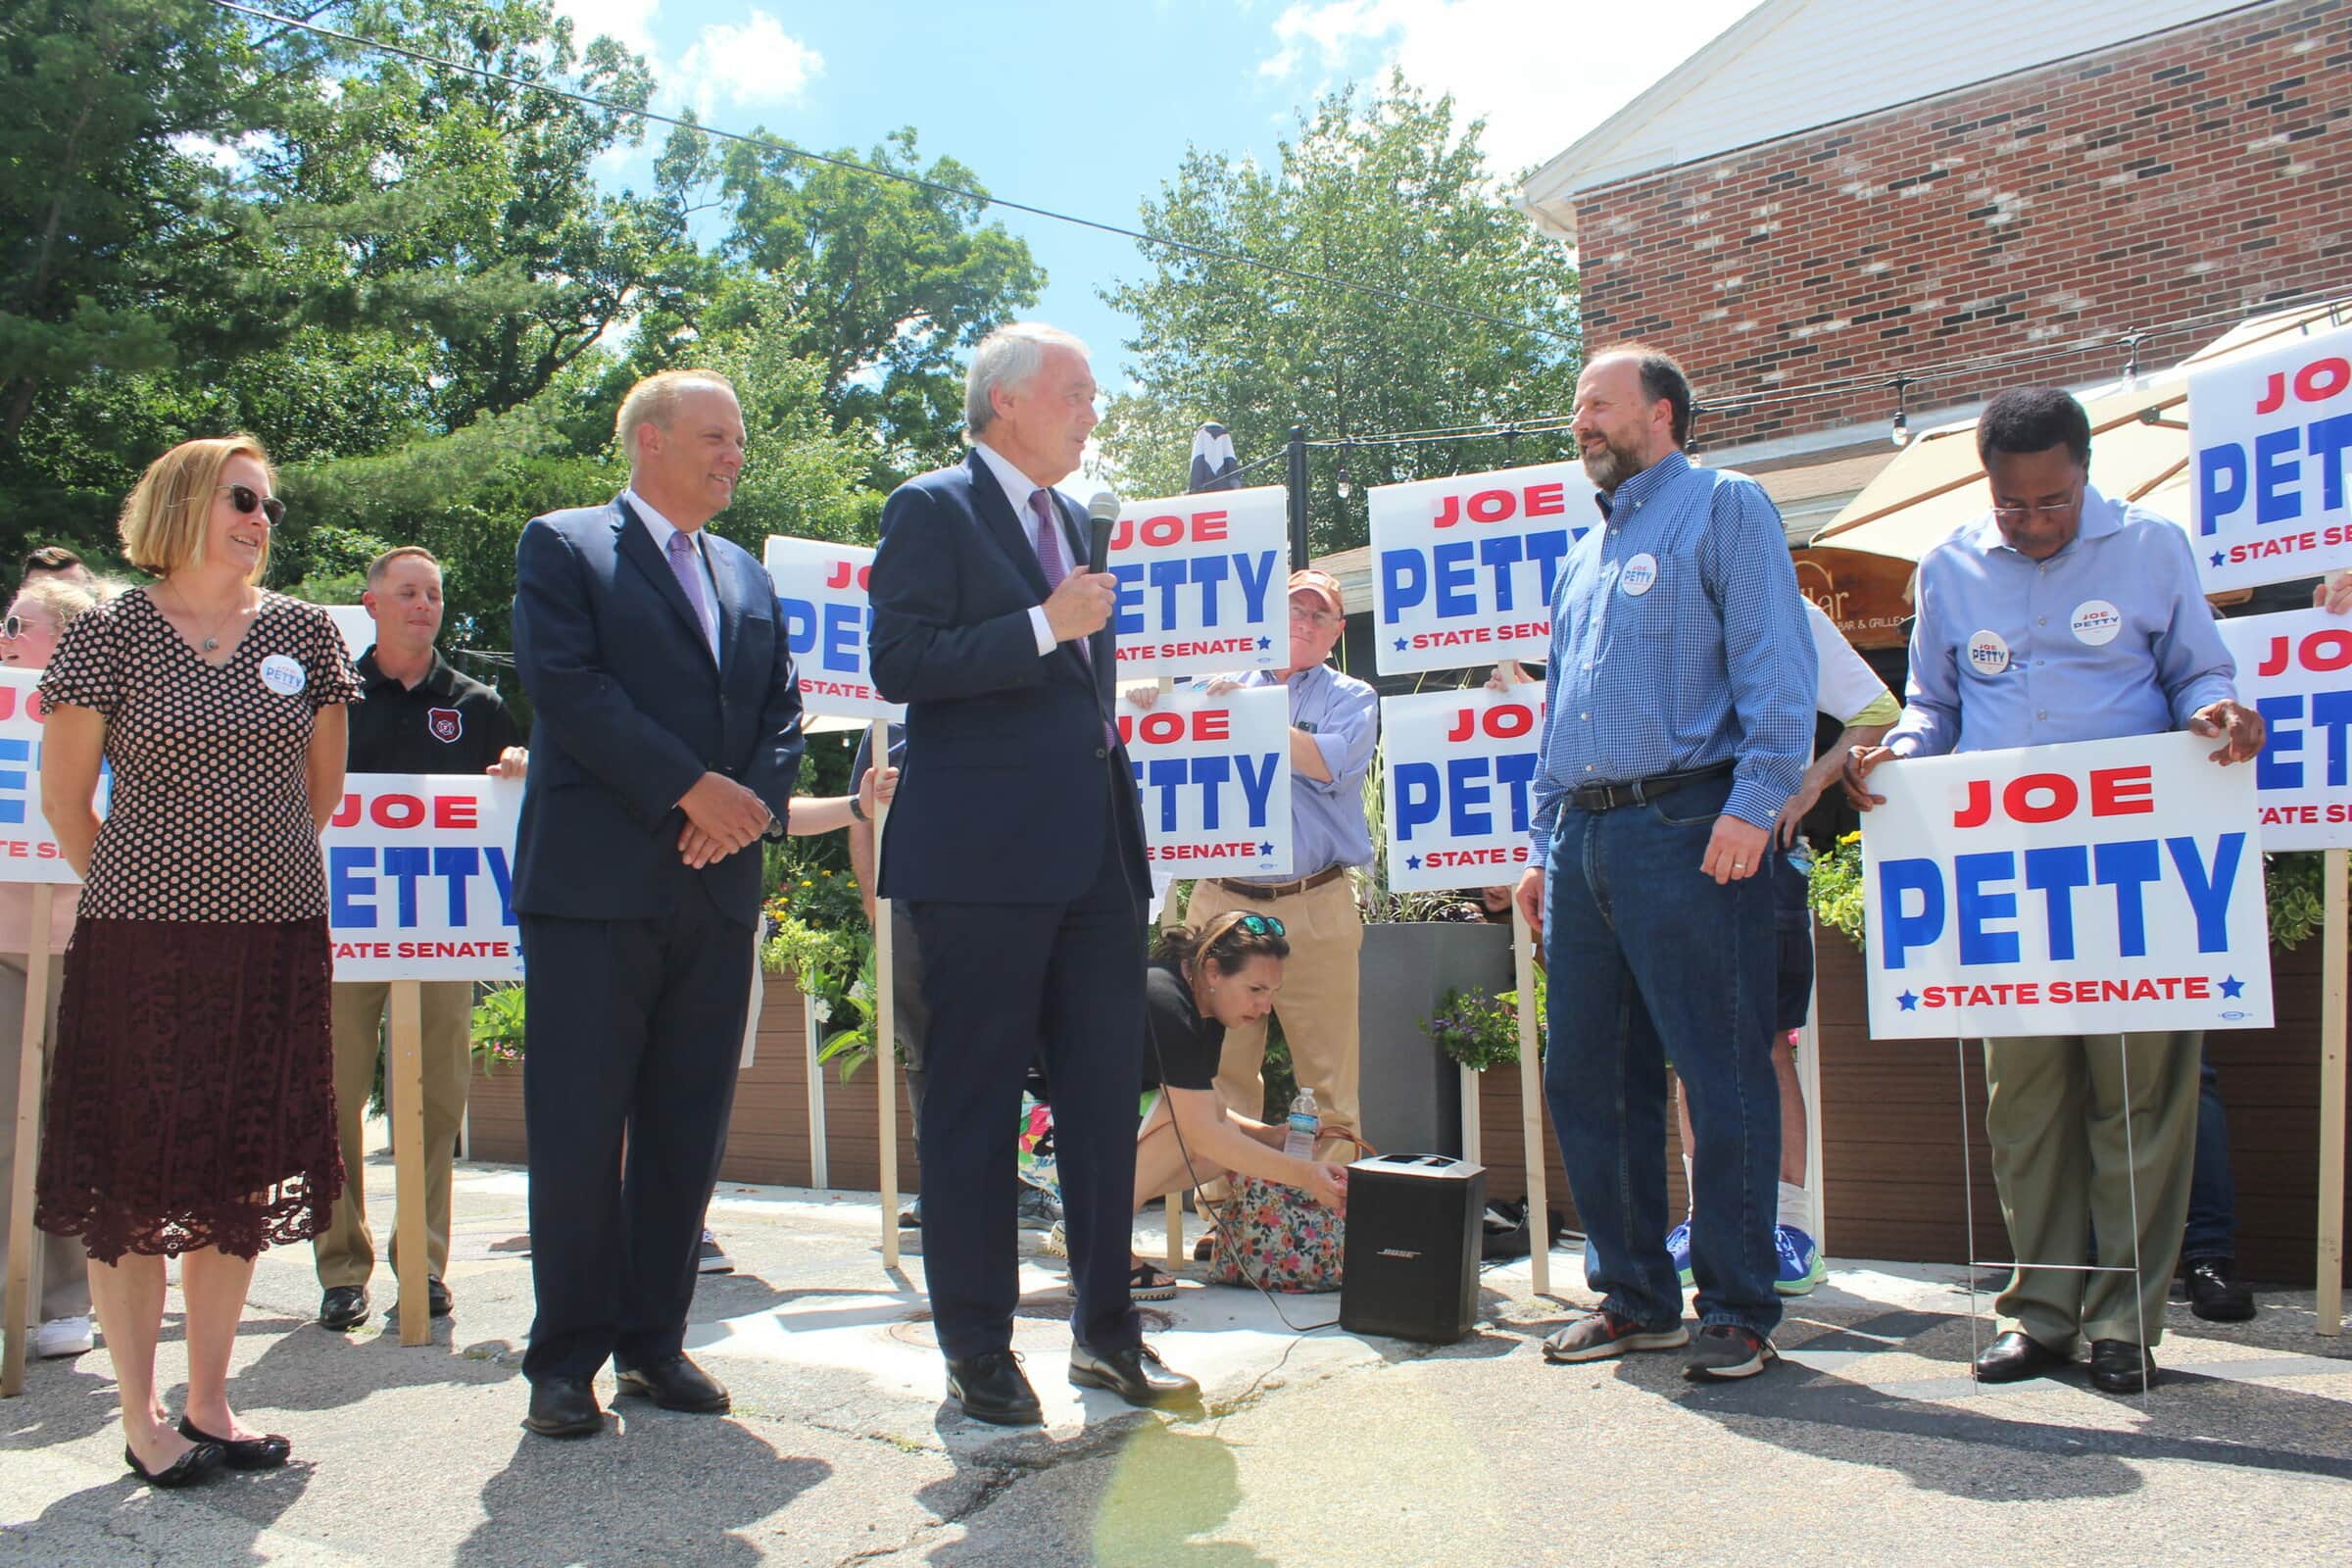 Sen. Ed Markey endorses Donaghue, Petty in state races